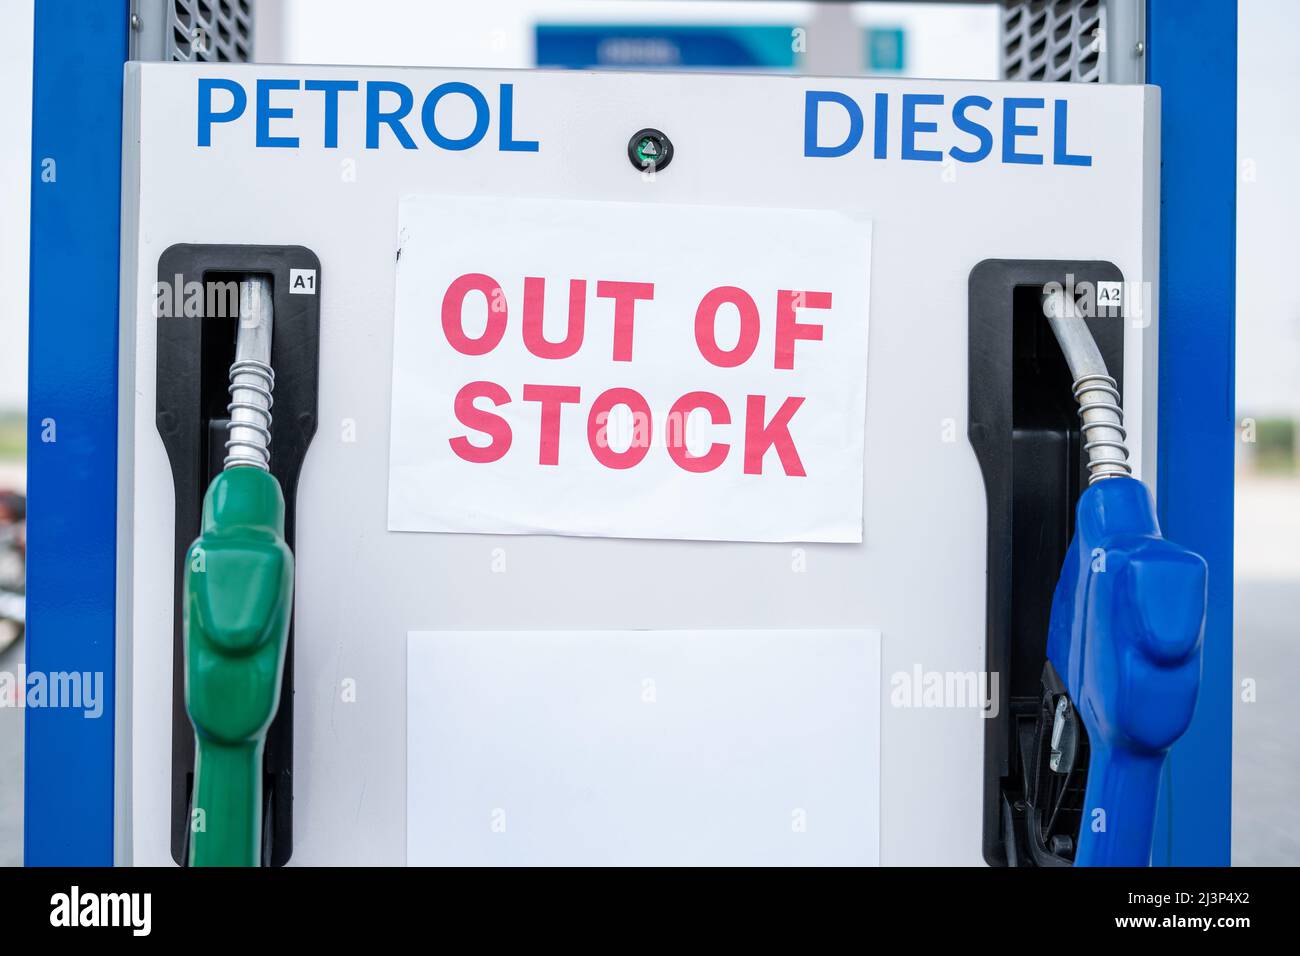 Out of stock sign board on petrol bunk due to economic crisies - concept of fuel shortage Stock Photo